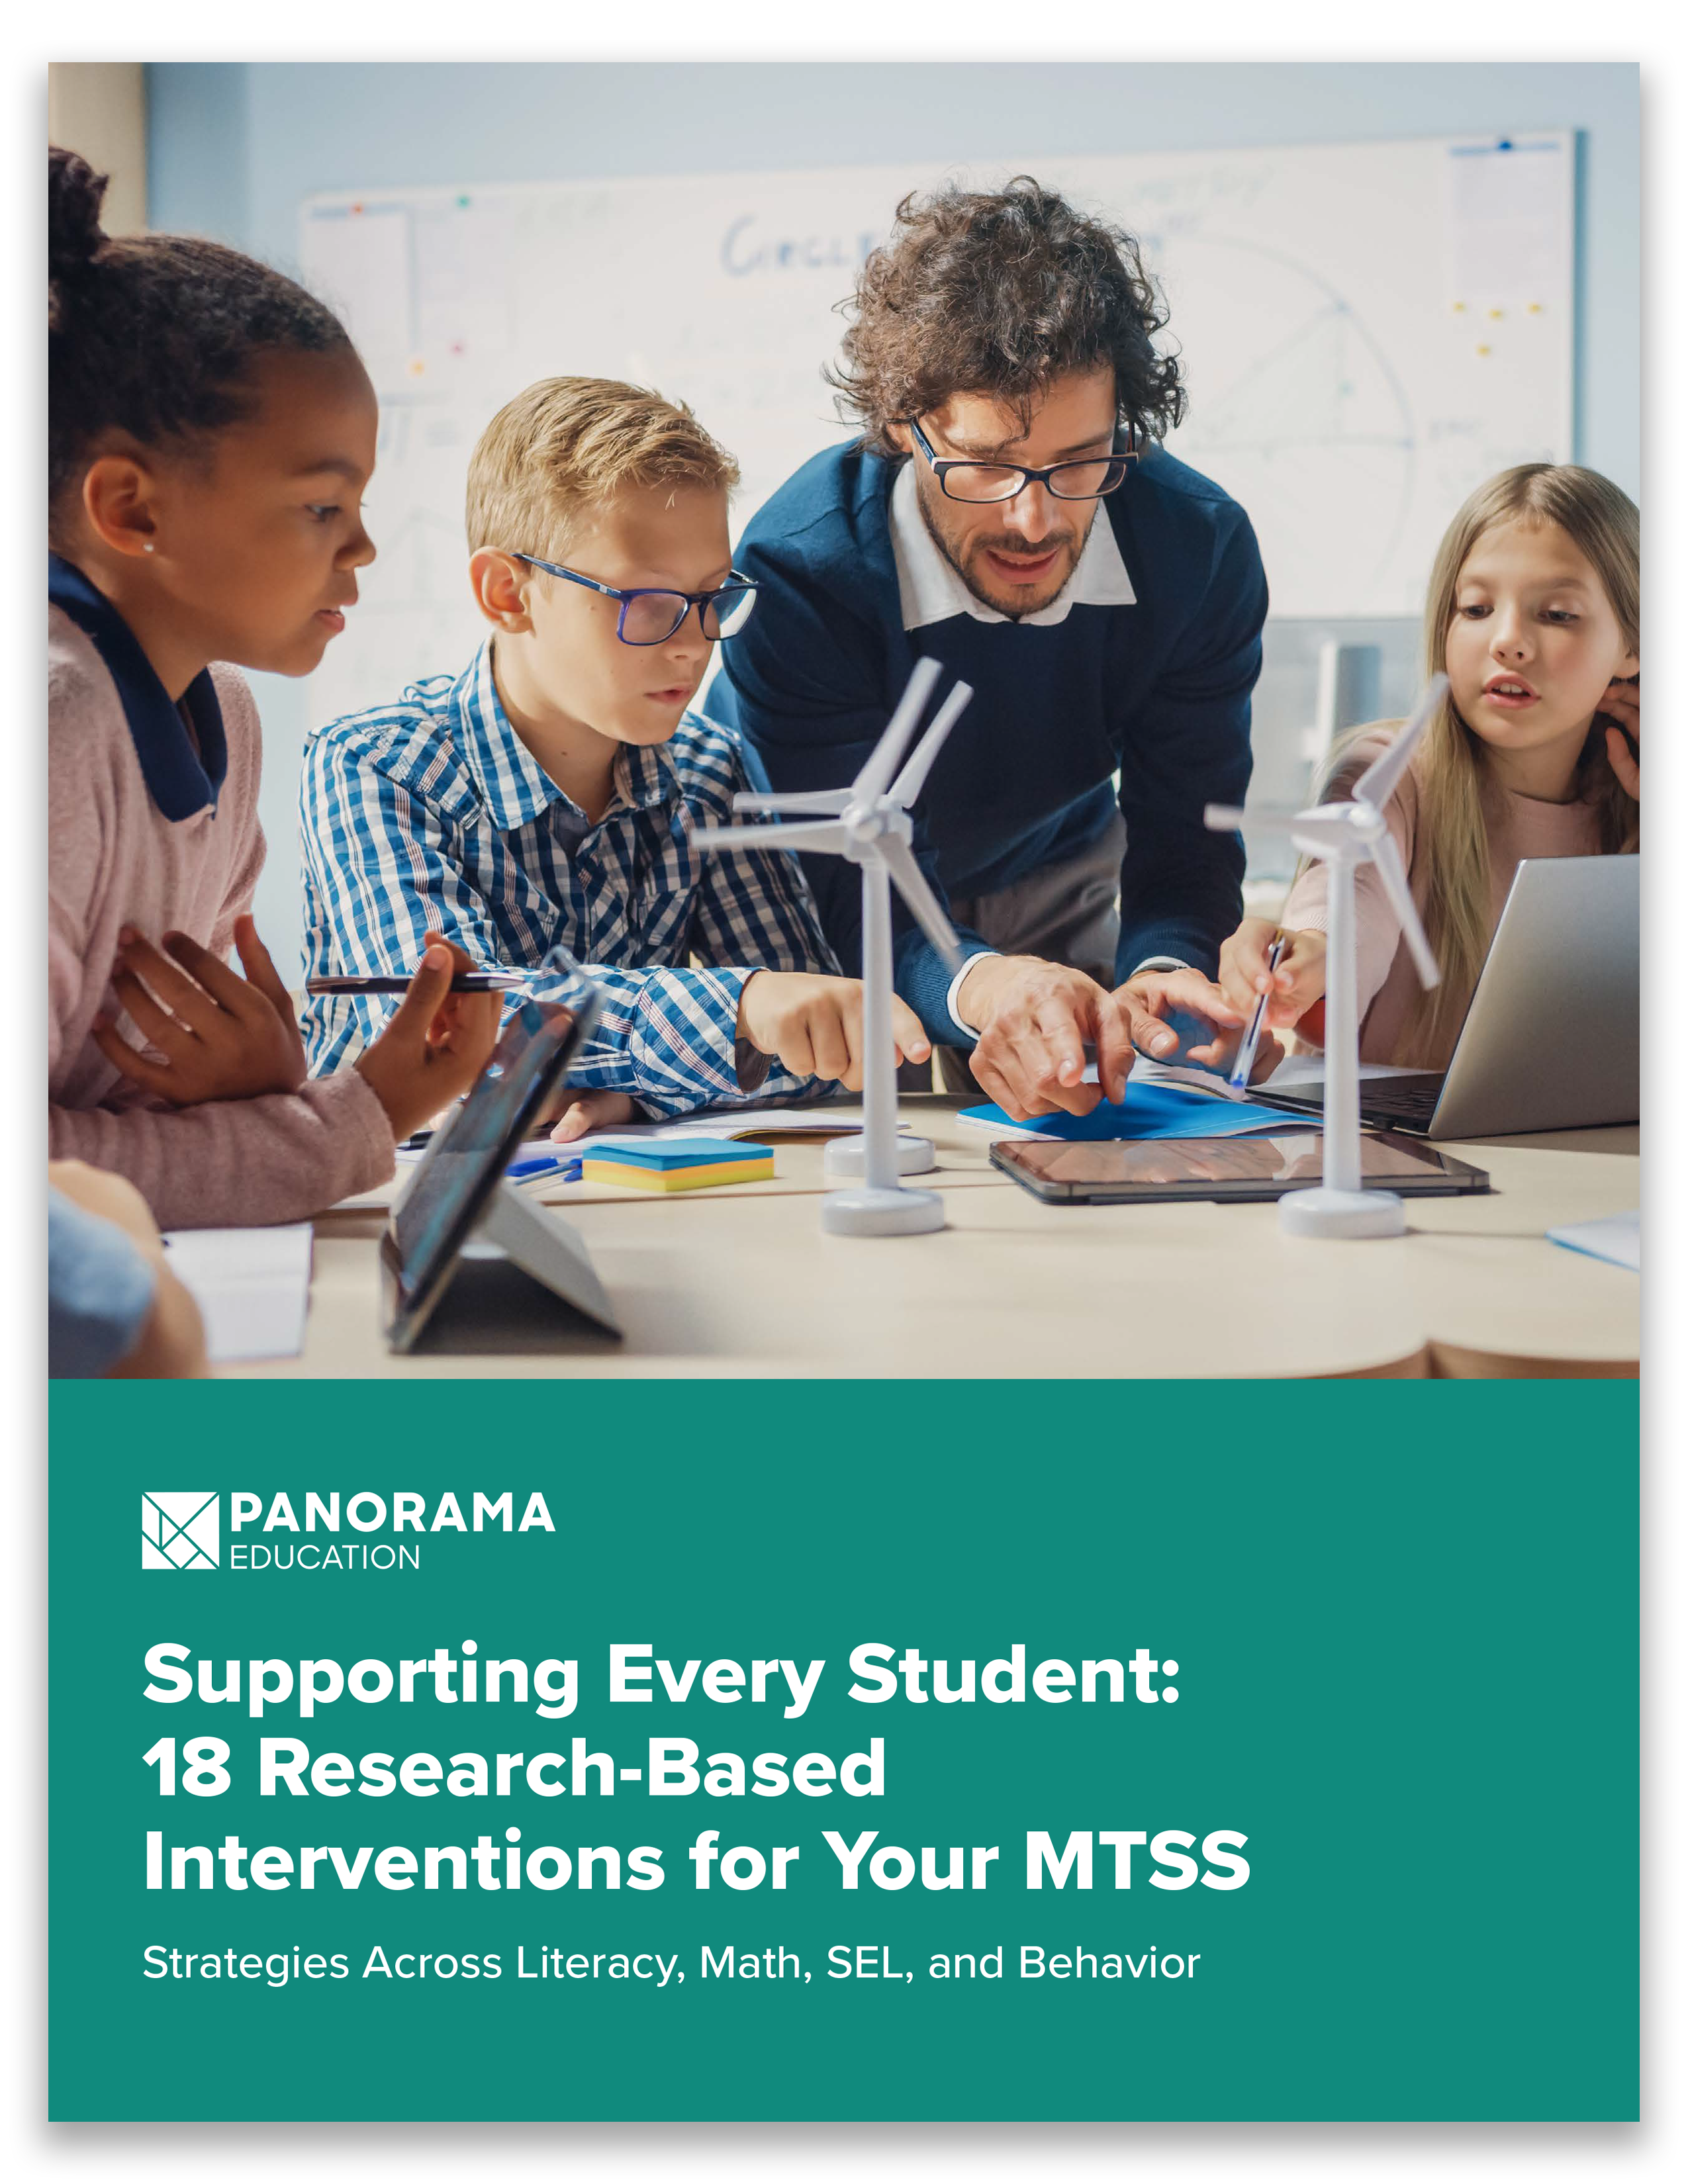 Supporting Every Student: 18 Research-Based Interventions for Your MTSS